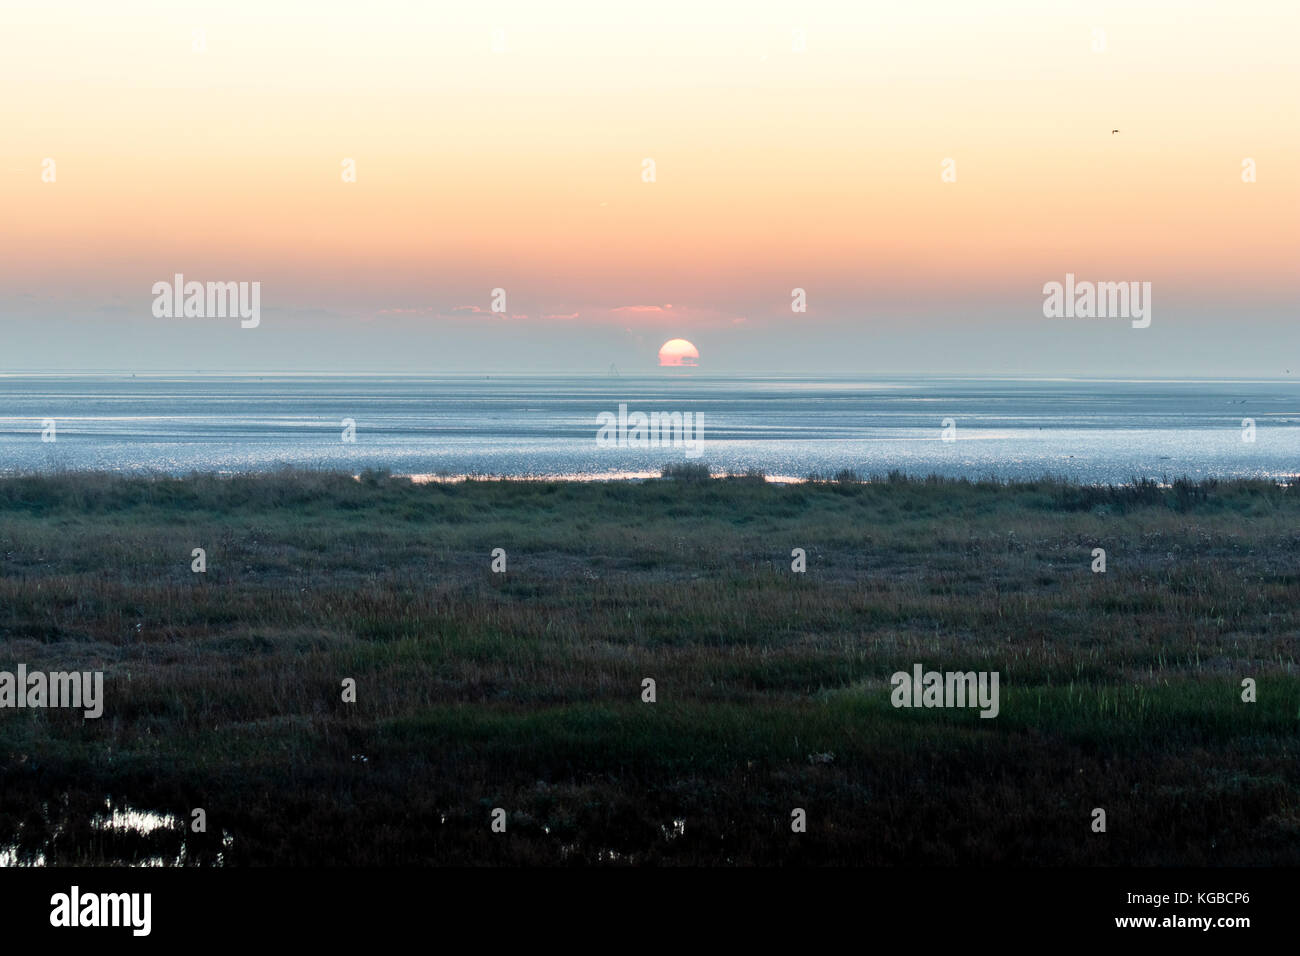 Sun rising over the sea with salt water spartina grass marsh in foreground. Faint cloud on horizon, sky clear above. Calm sea. Pegwell Bay, at Ramsgate, England. Stock Photo